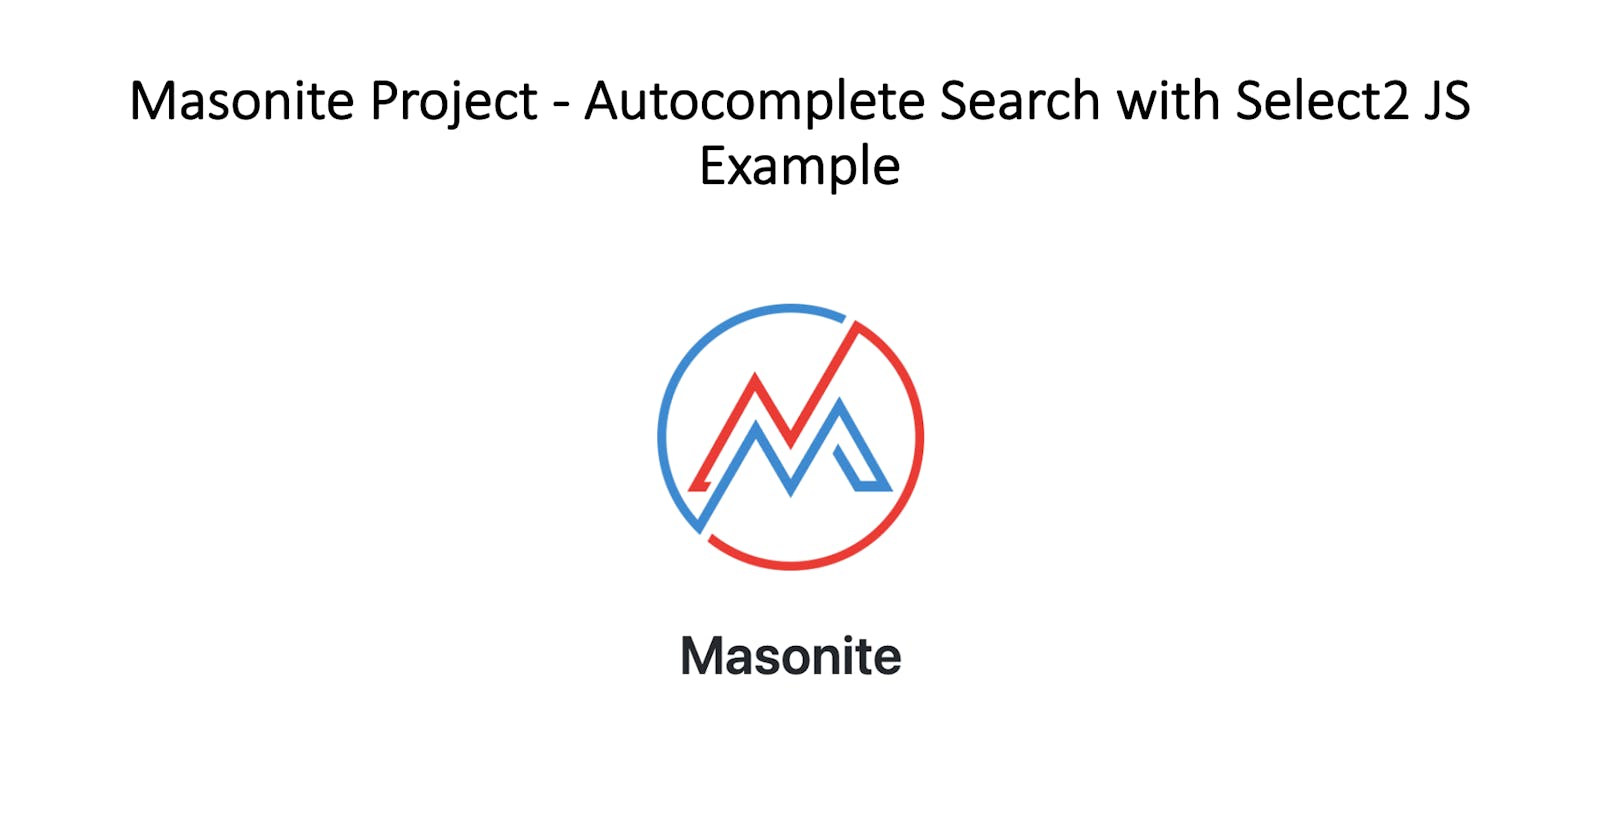 Masonite Project - Autocomplete Search with Select2 JS Example